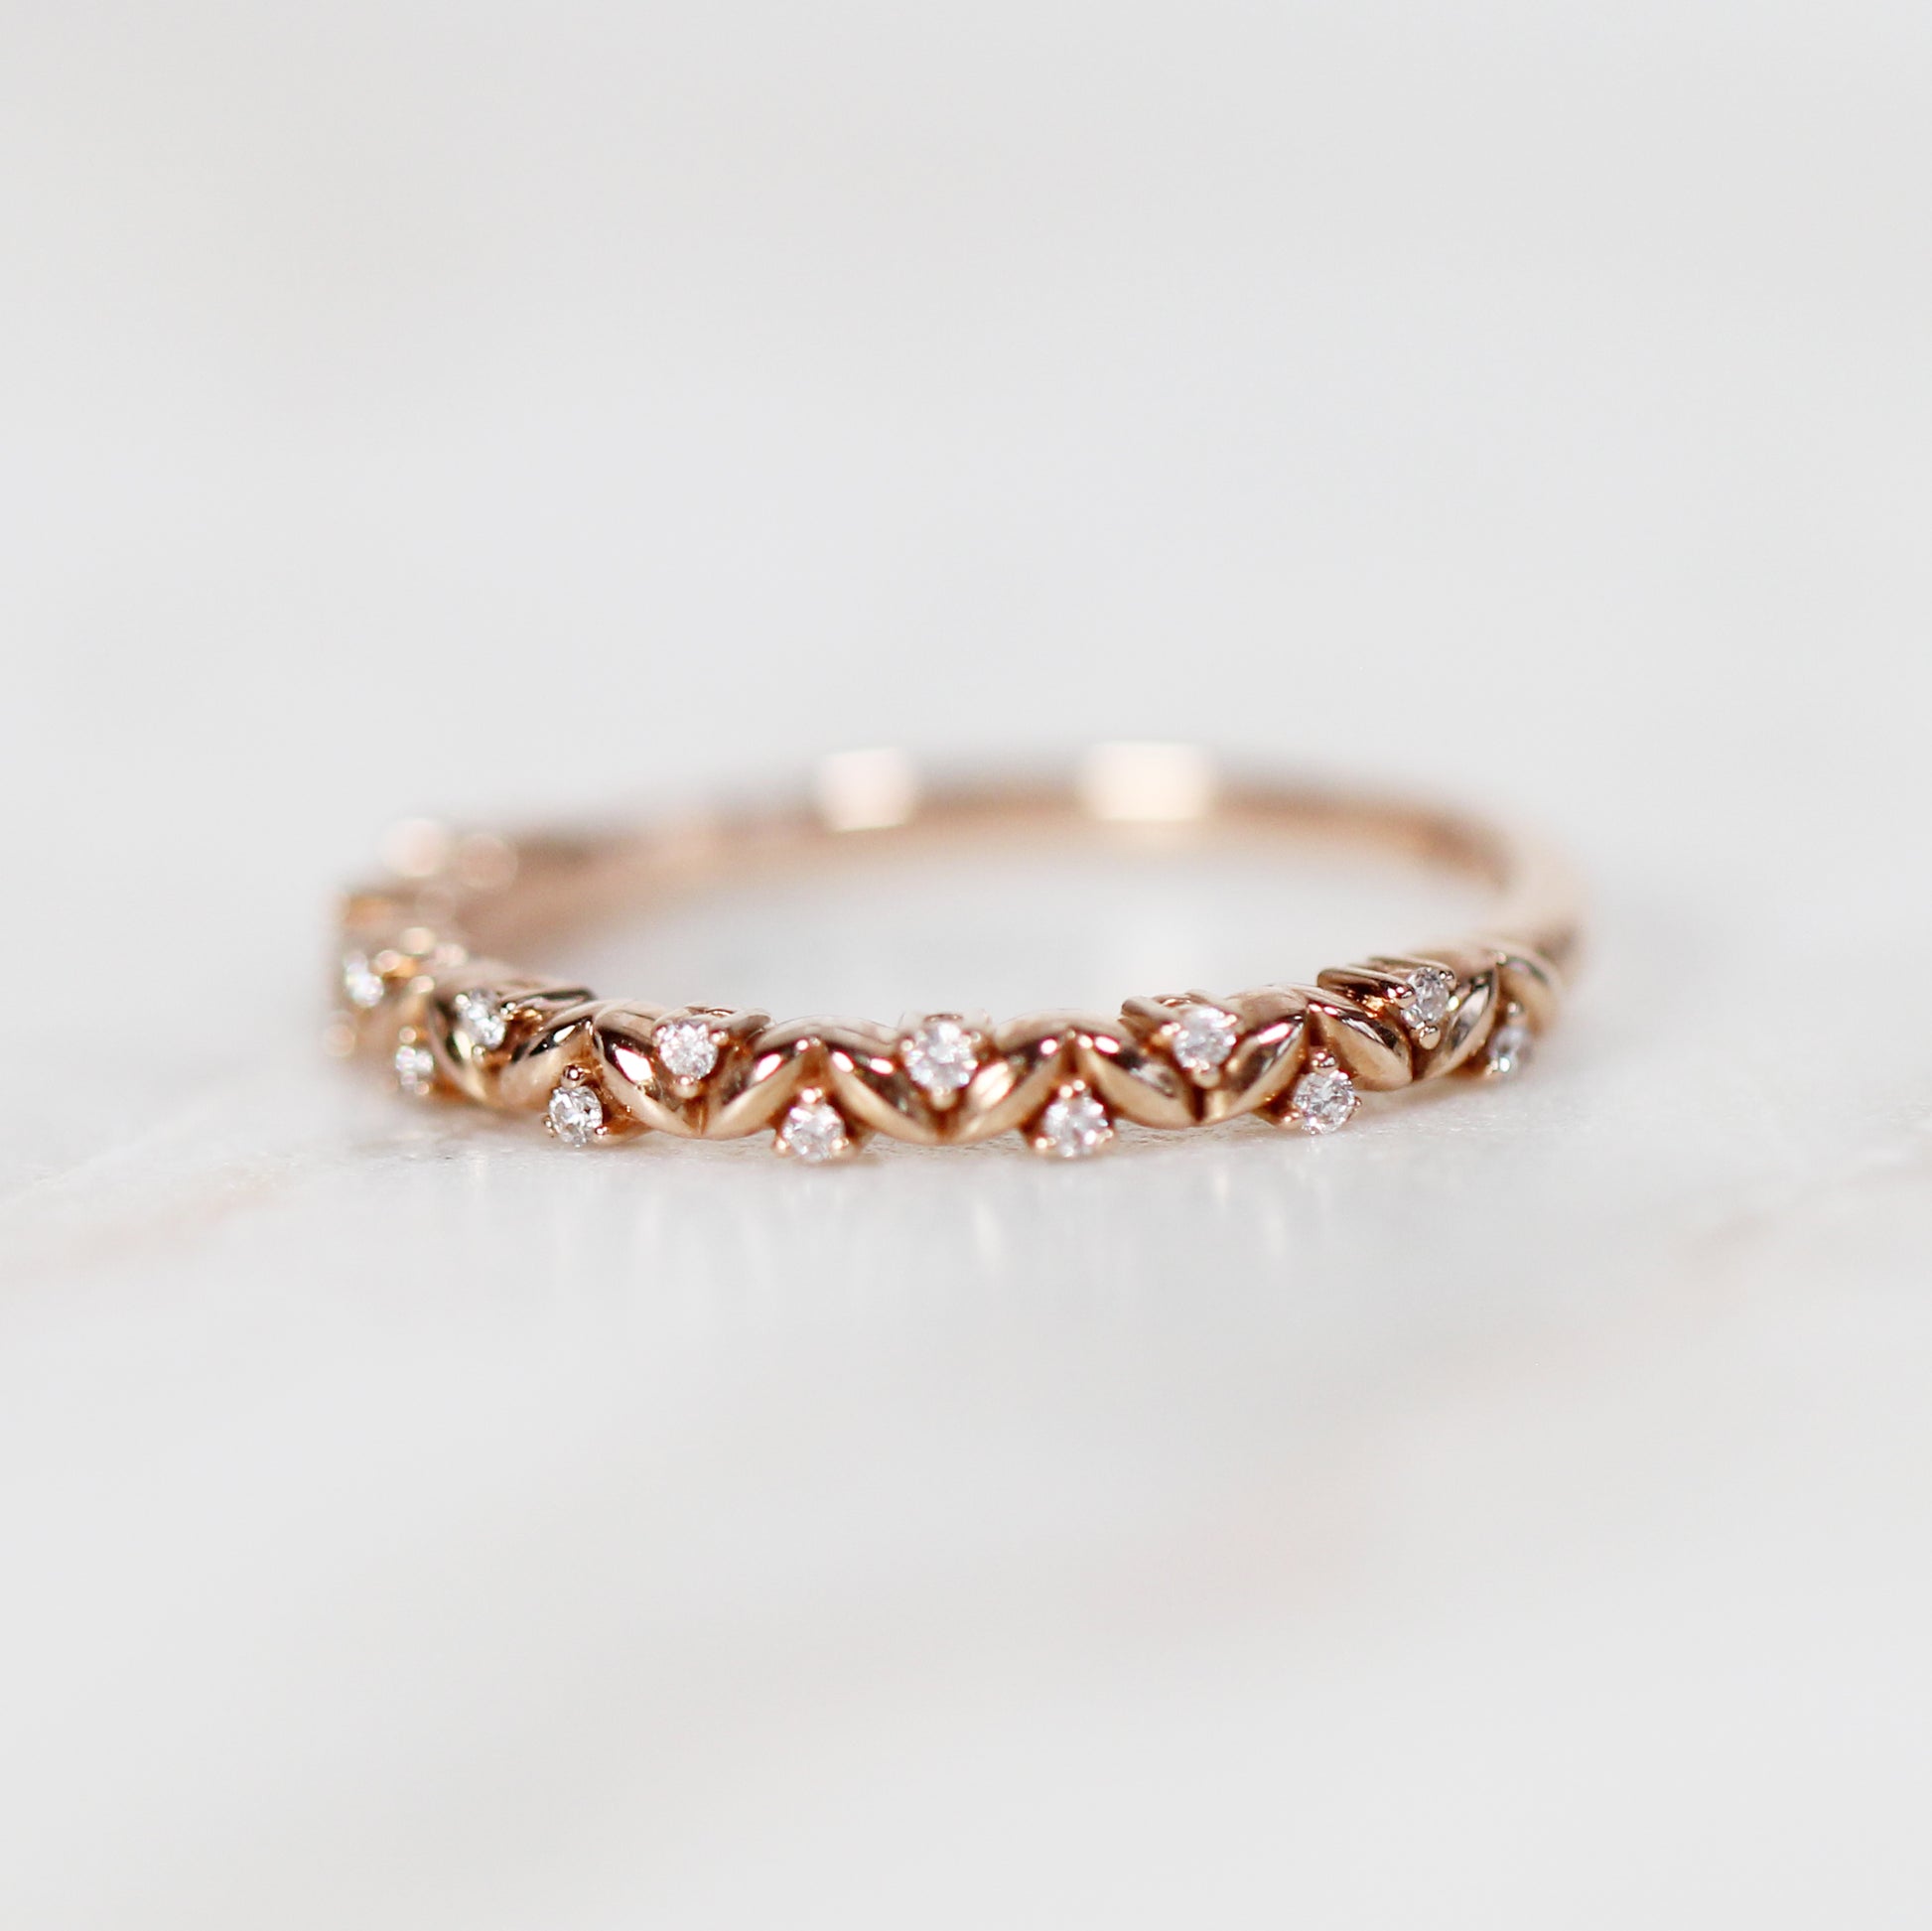 Brynn - Natural Floral Leaf Diamond Wedding or Stacking Ring Band - Midwinter Co. Alternative Bridal Rings and Modern Fine Jewelry